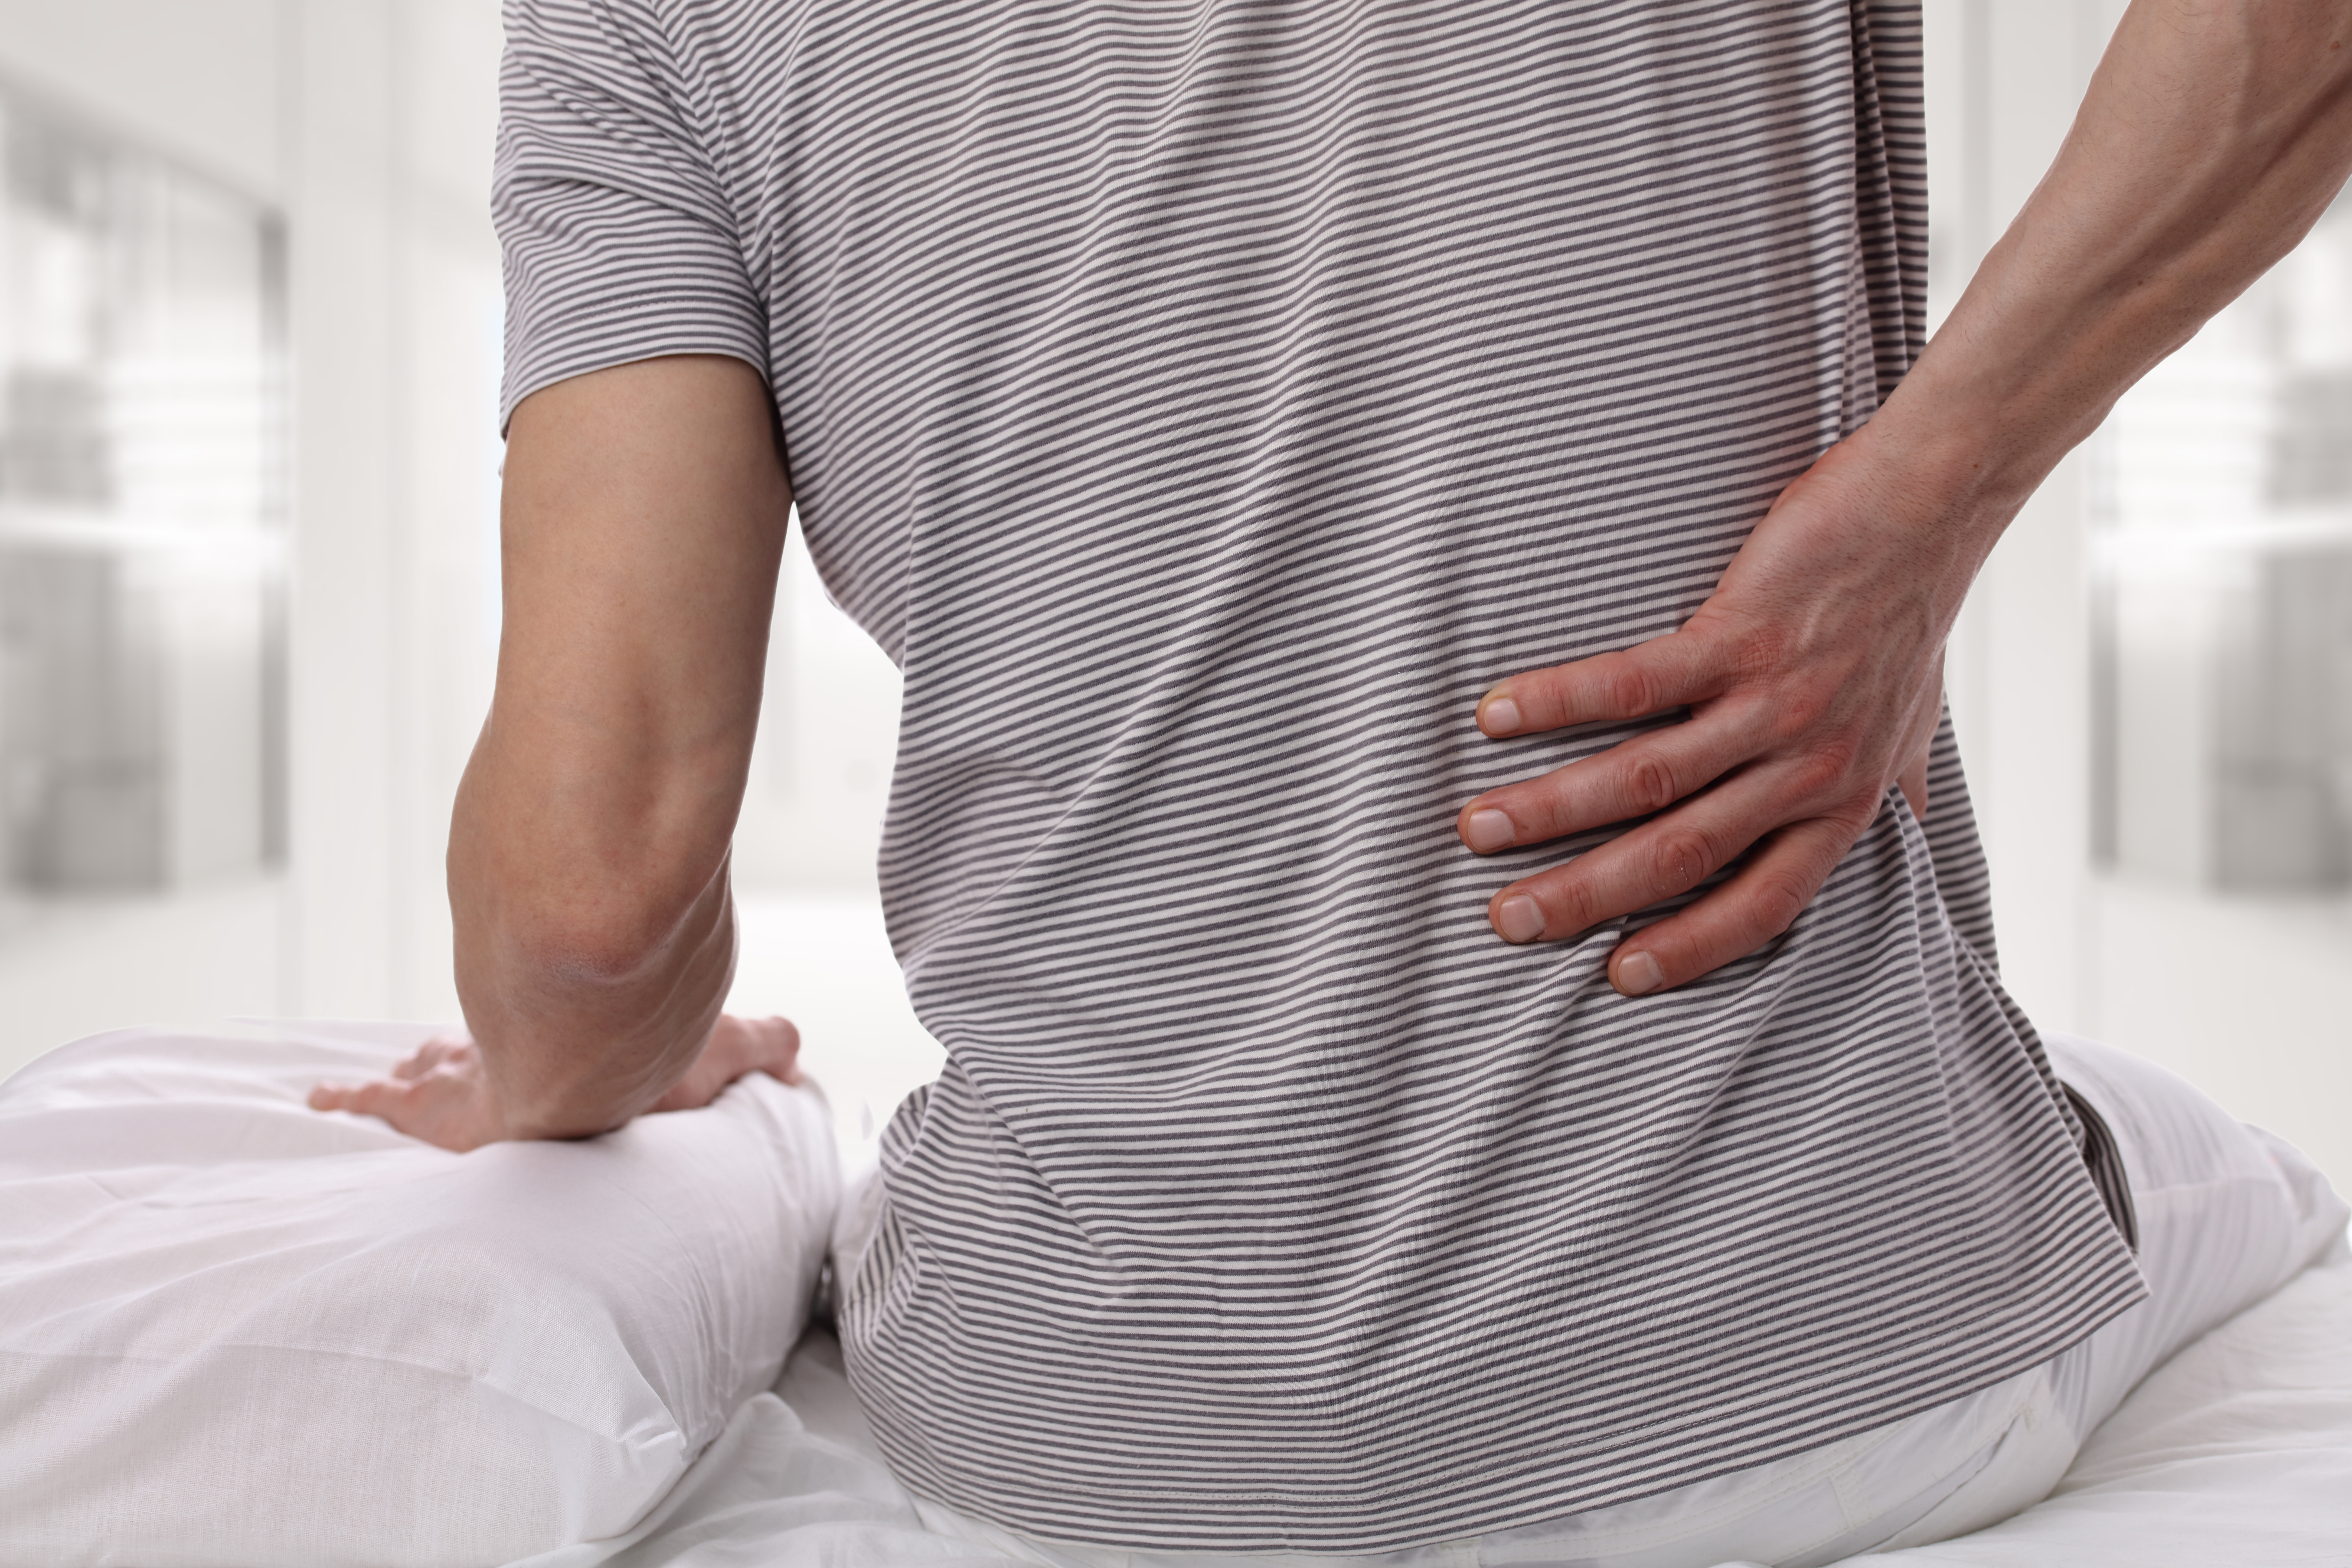 man holding back in pain due to degenerative disc disease